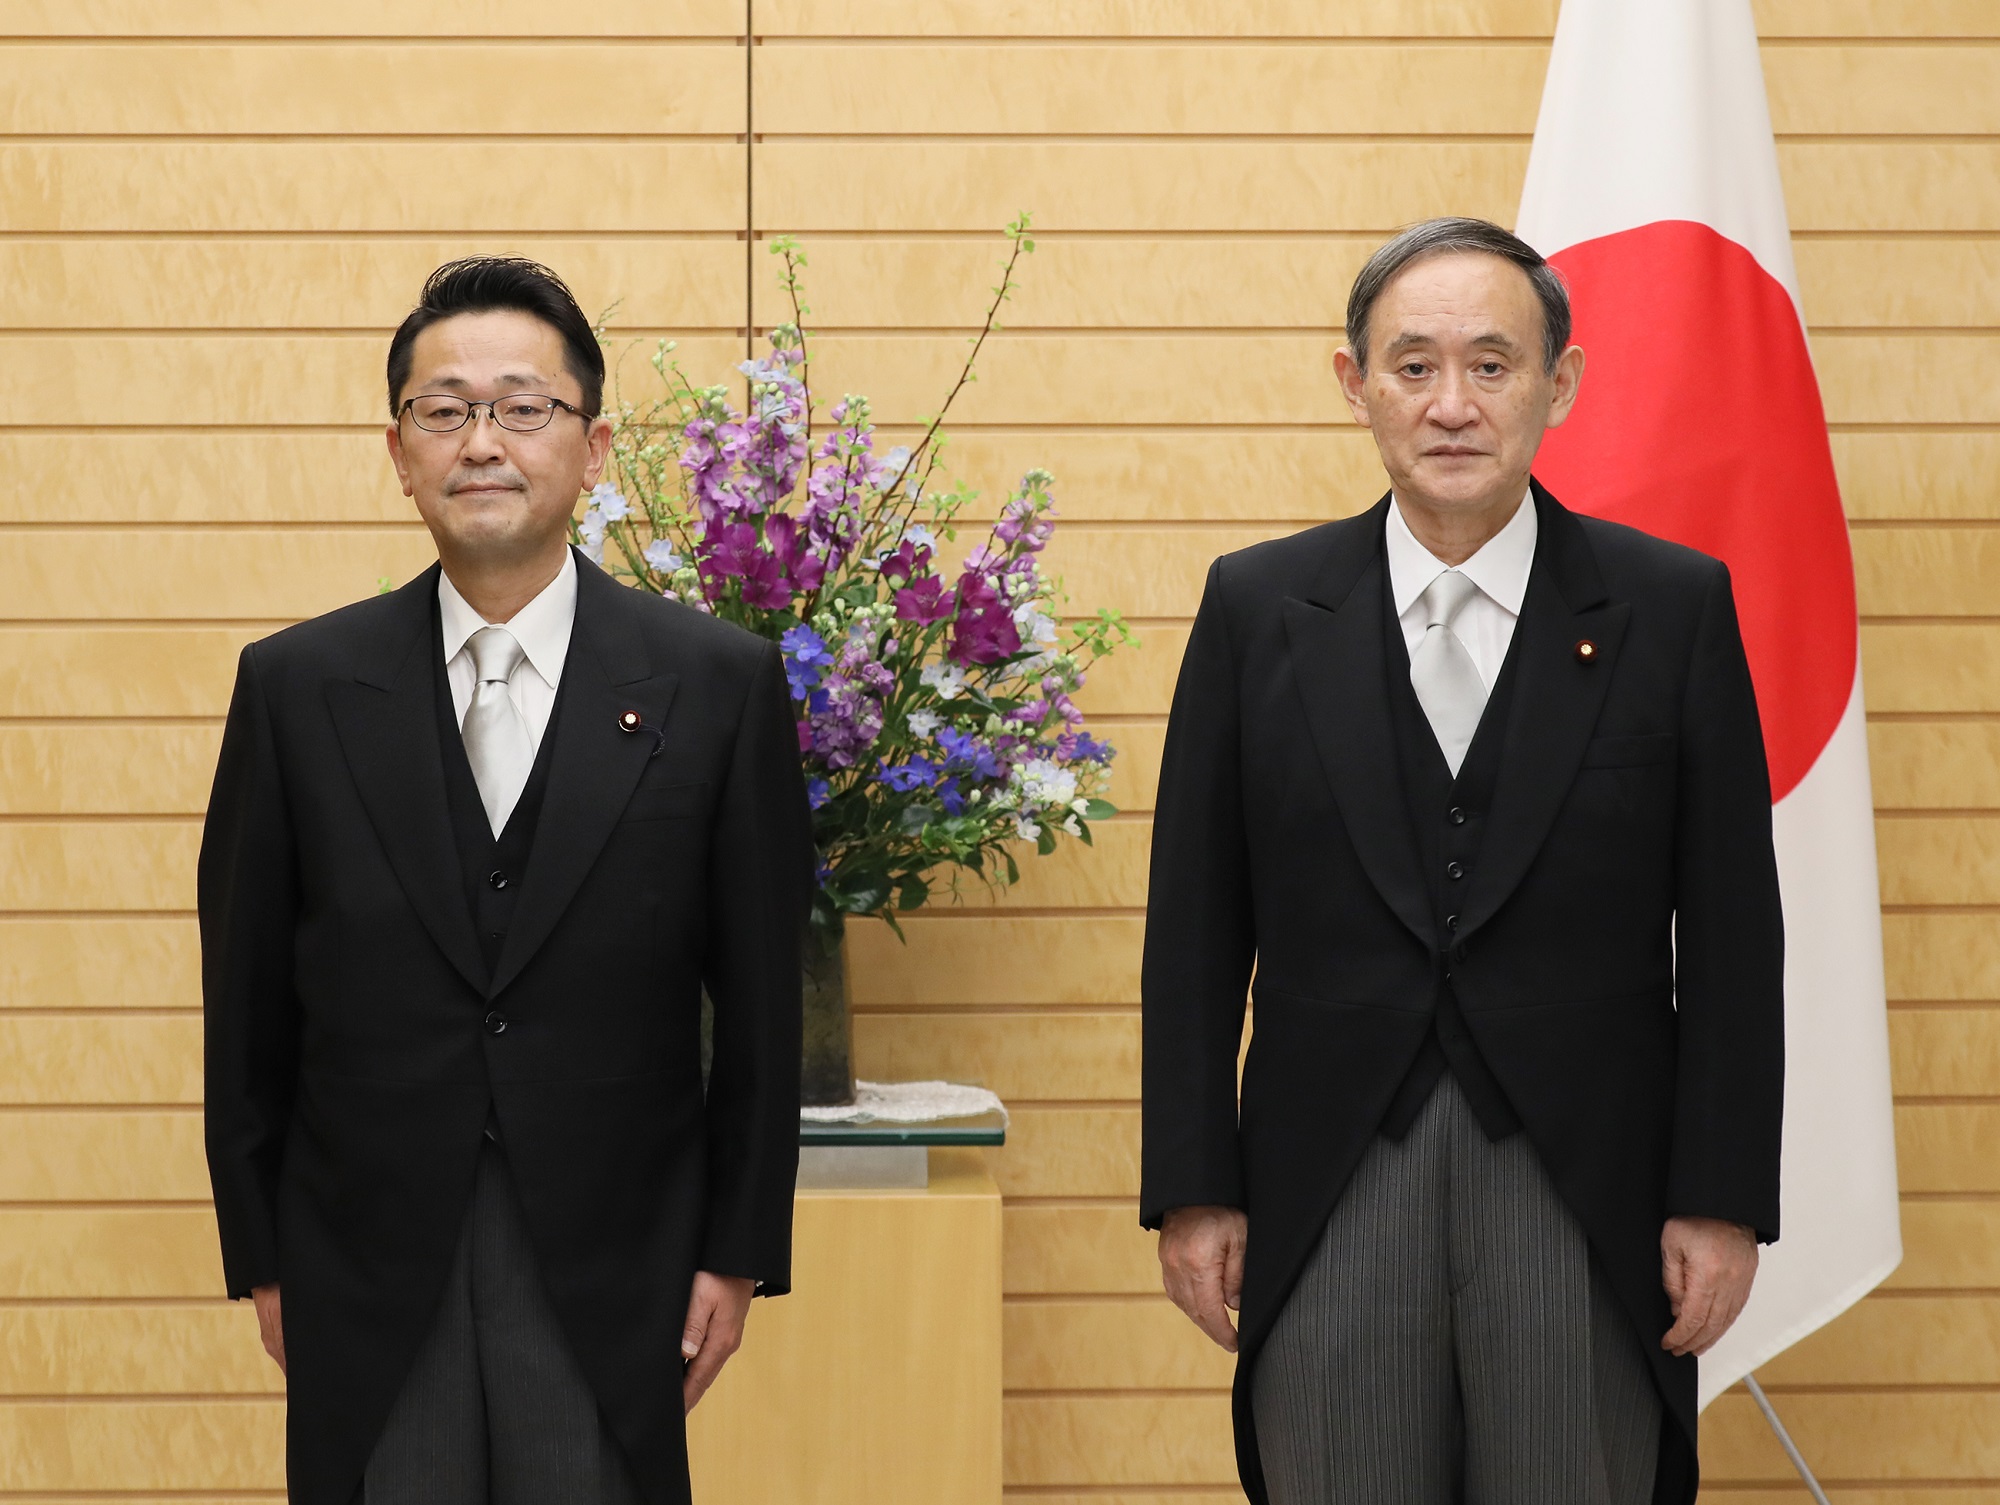 Photograph of the Prime Minister attending a photograph session with the newly appointed Minister Niwa (2)